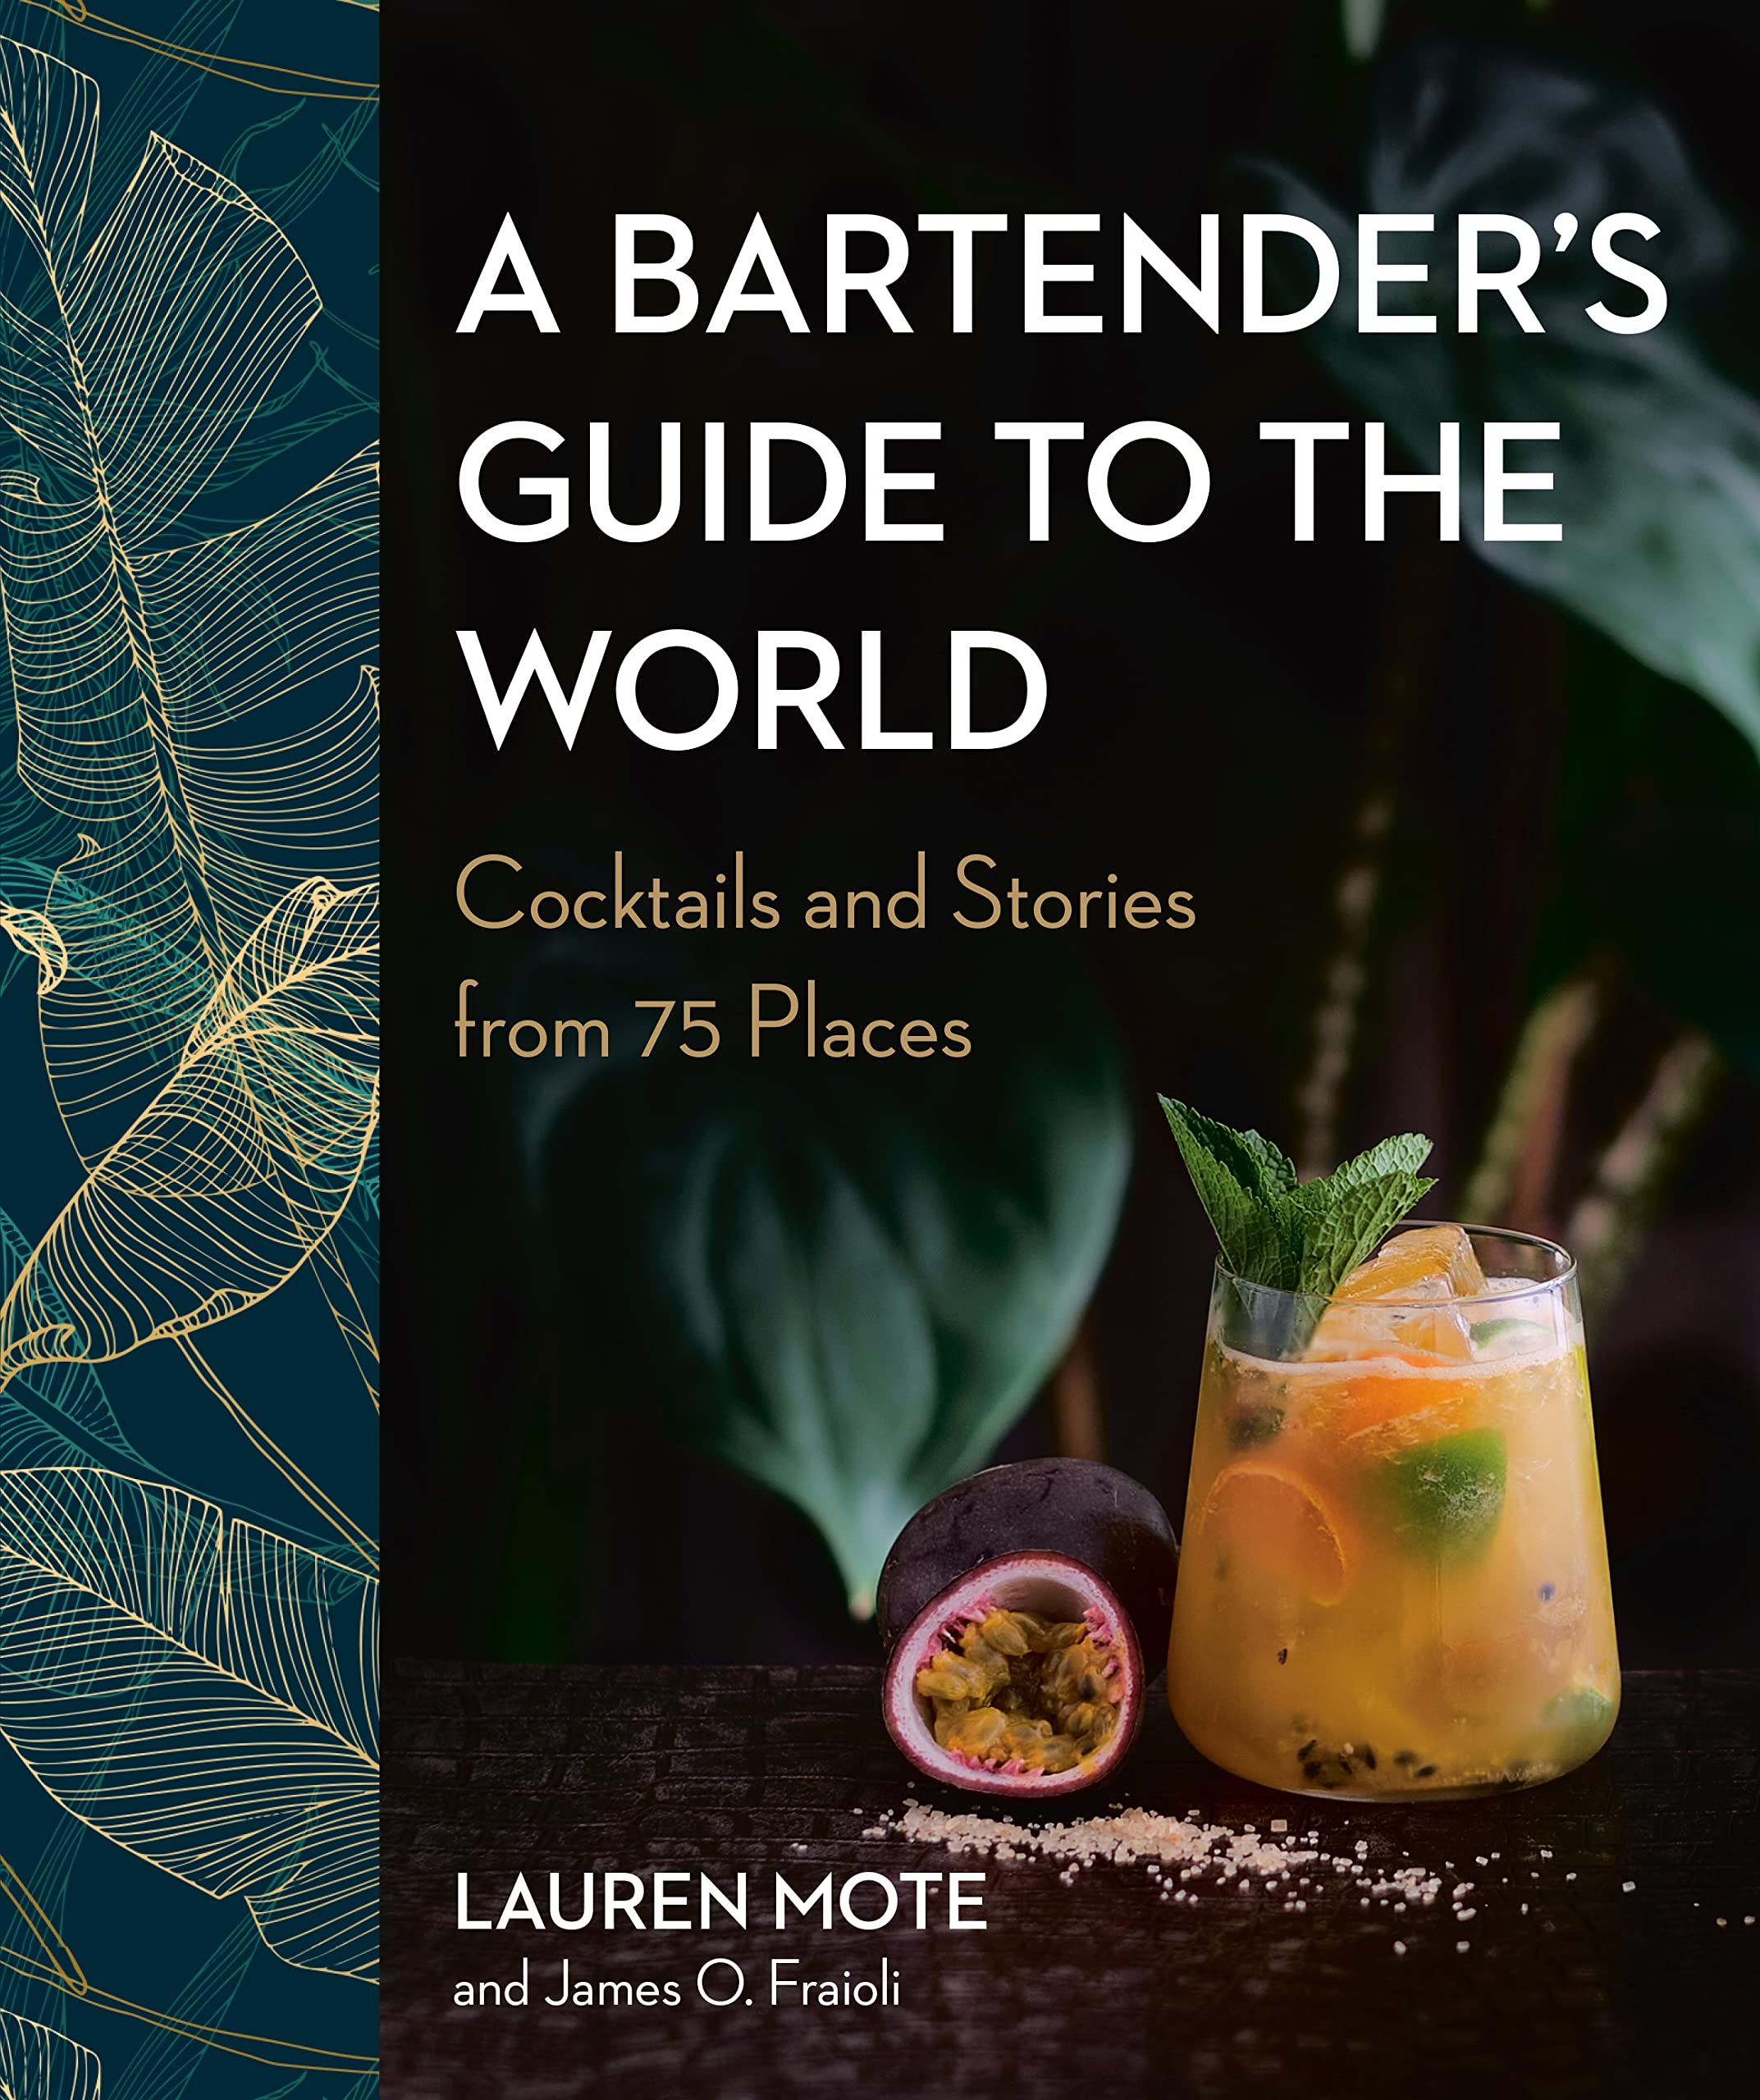 A Bartender's Guide to the World: Cocktails and Stories from 75 Places (Lauren Mote, James O. Fraioli.)